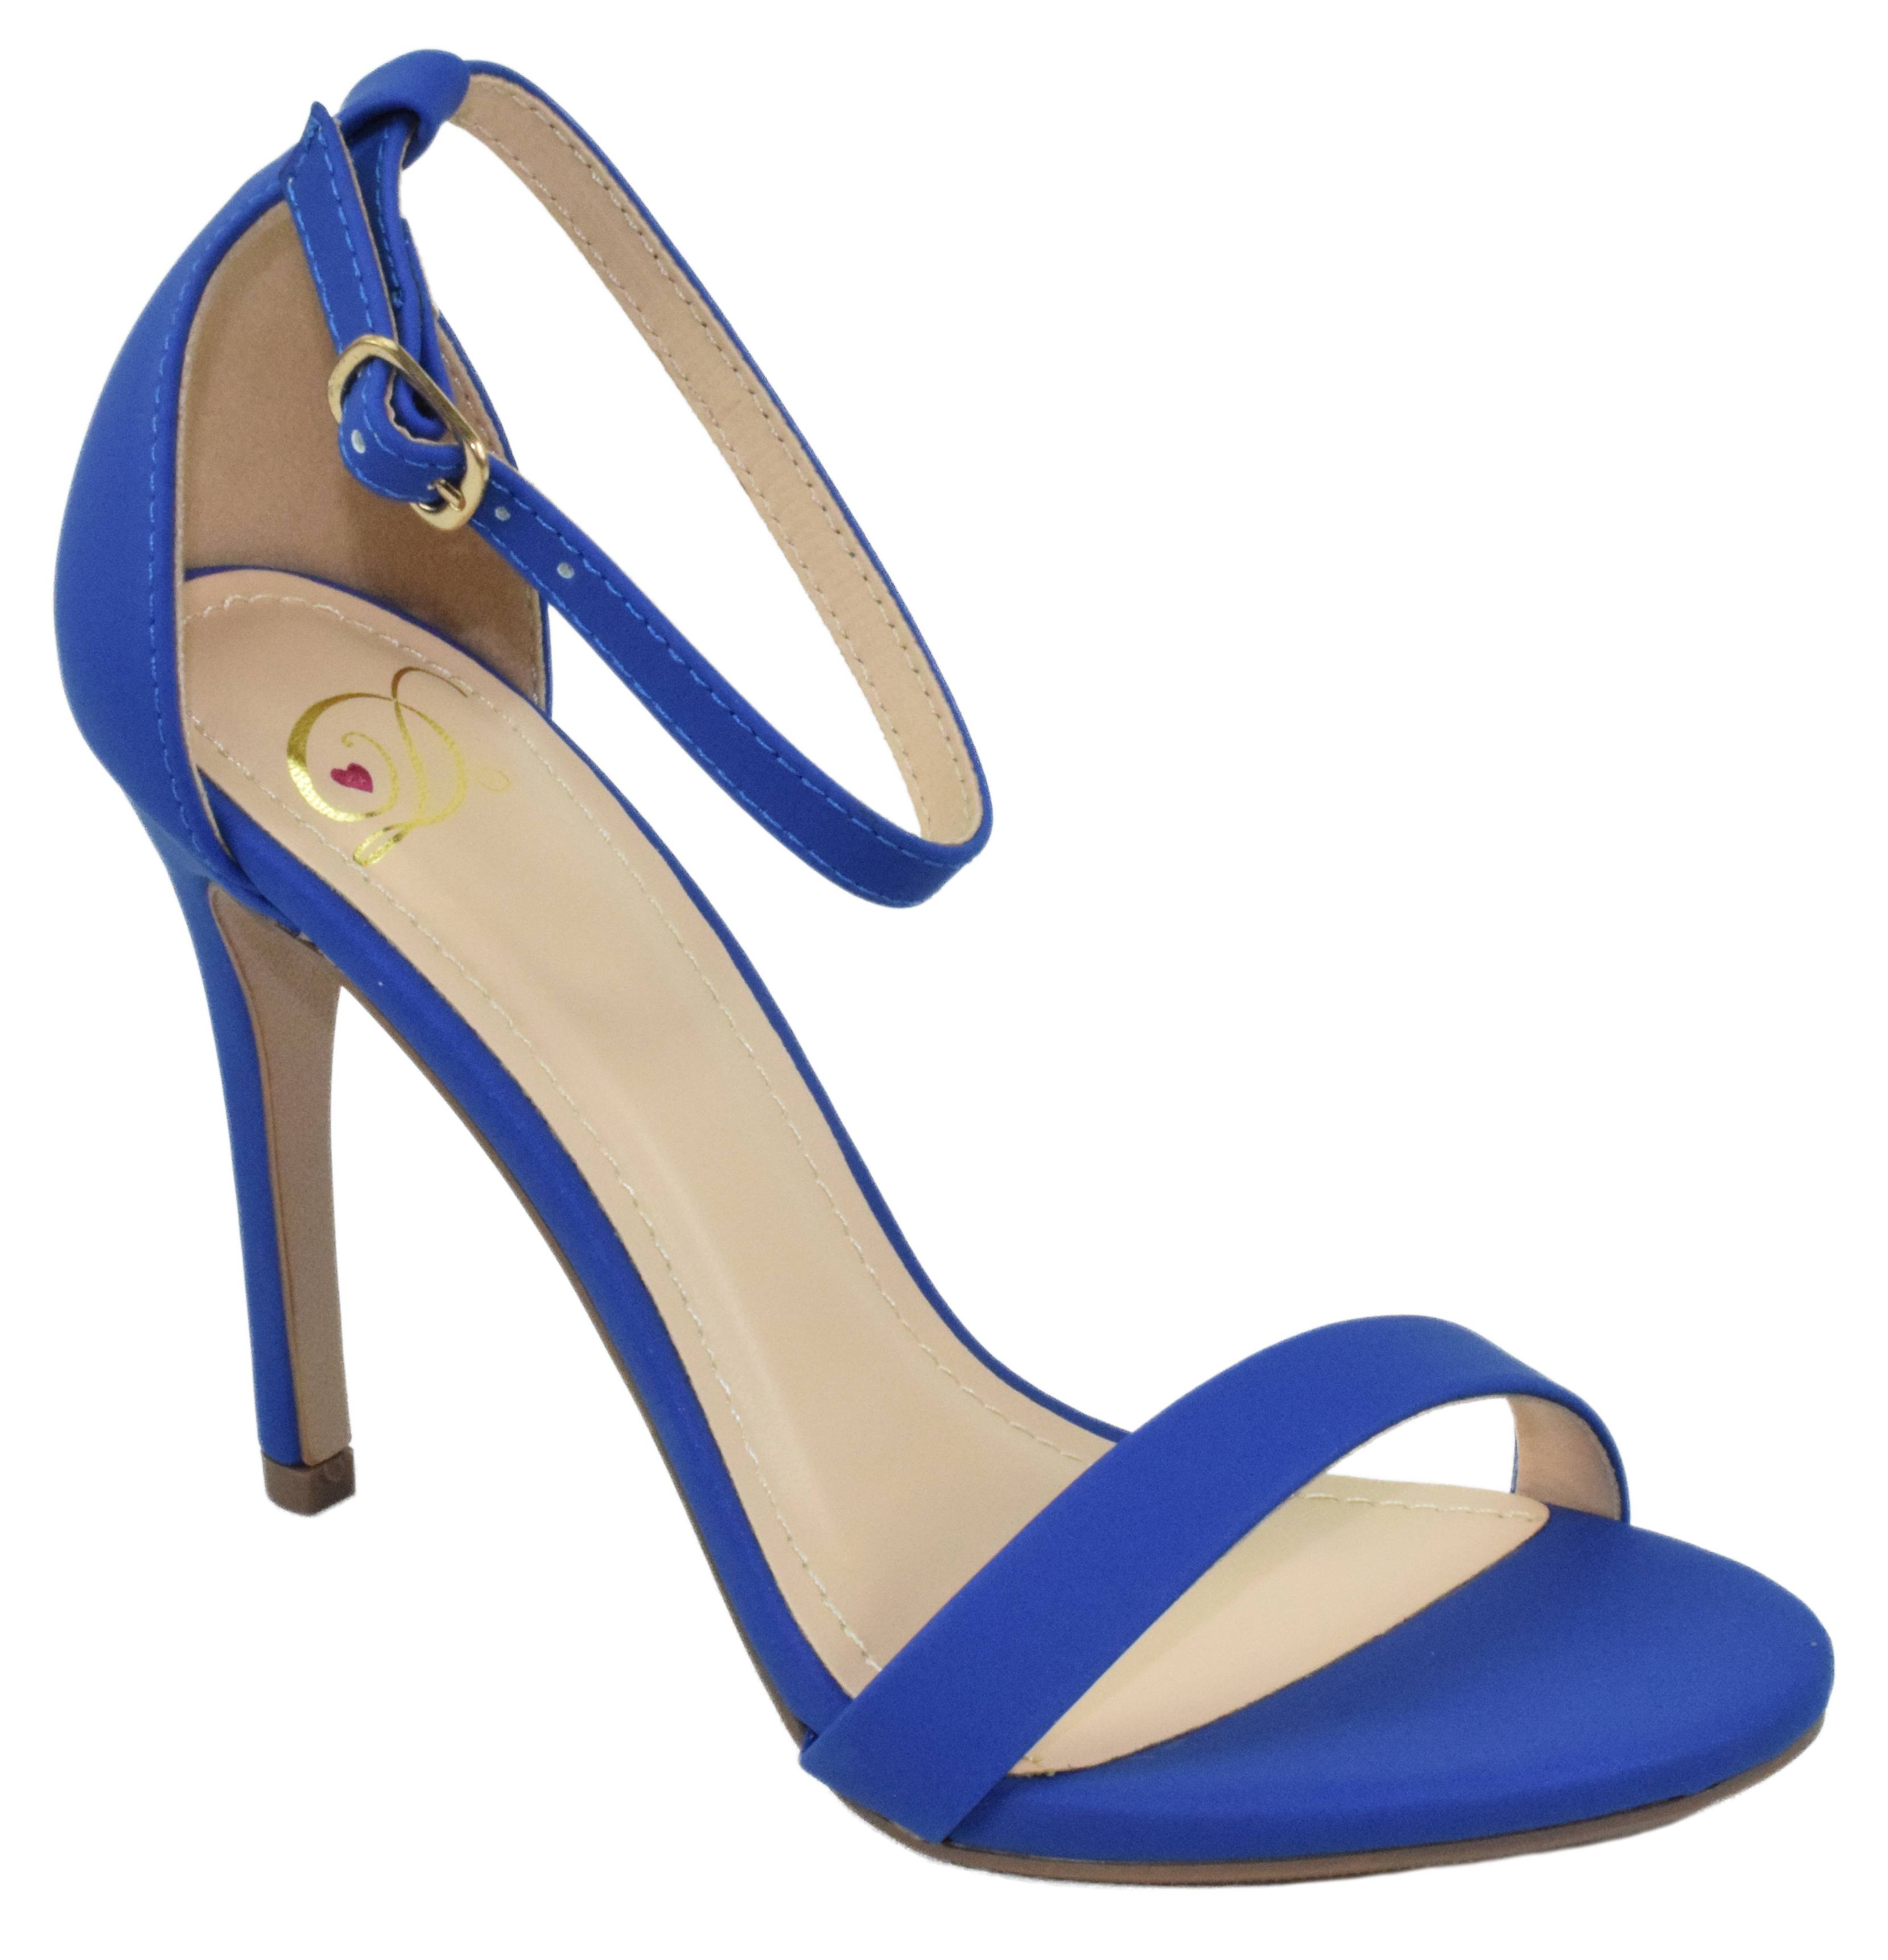 Delicious Shoes Women Ankle Strap High Heel Open Toe Formal/Casual Dress Sandals JAIDEN Royal Blue Cobalt 7 - image 1 of 2